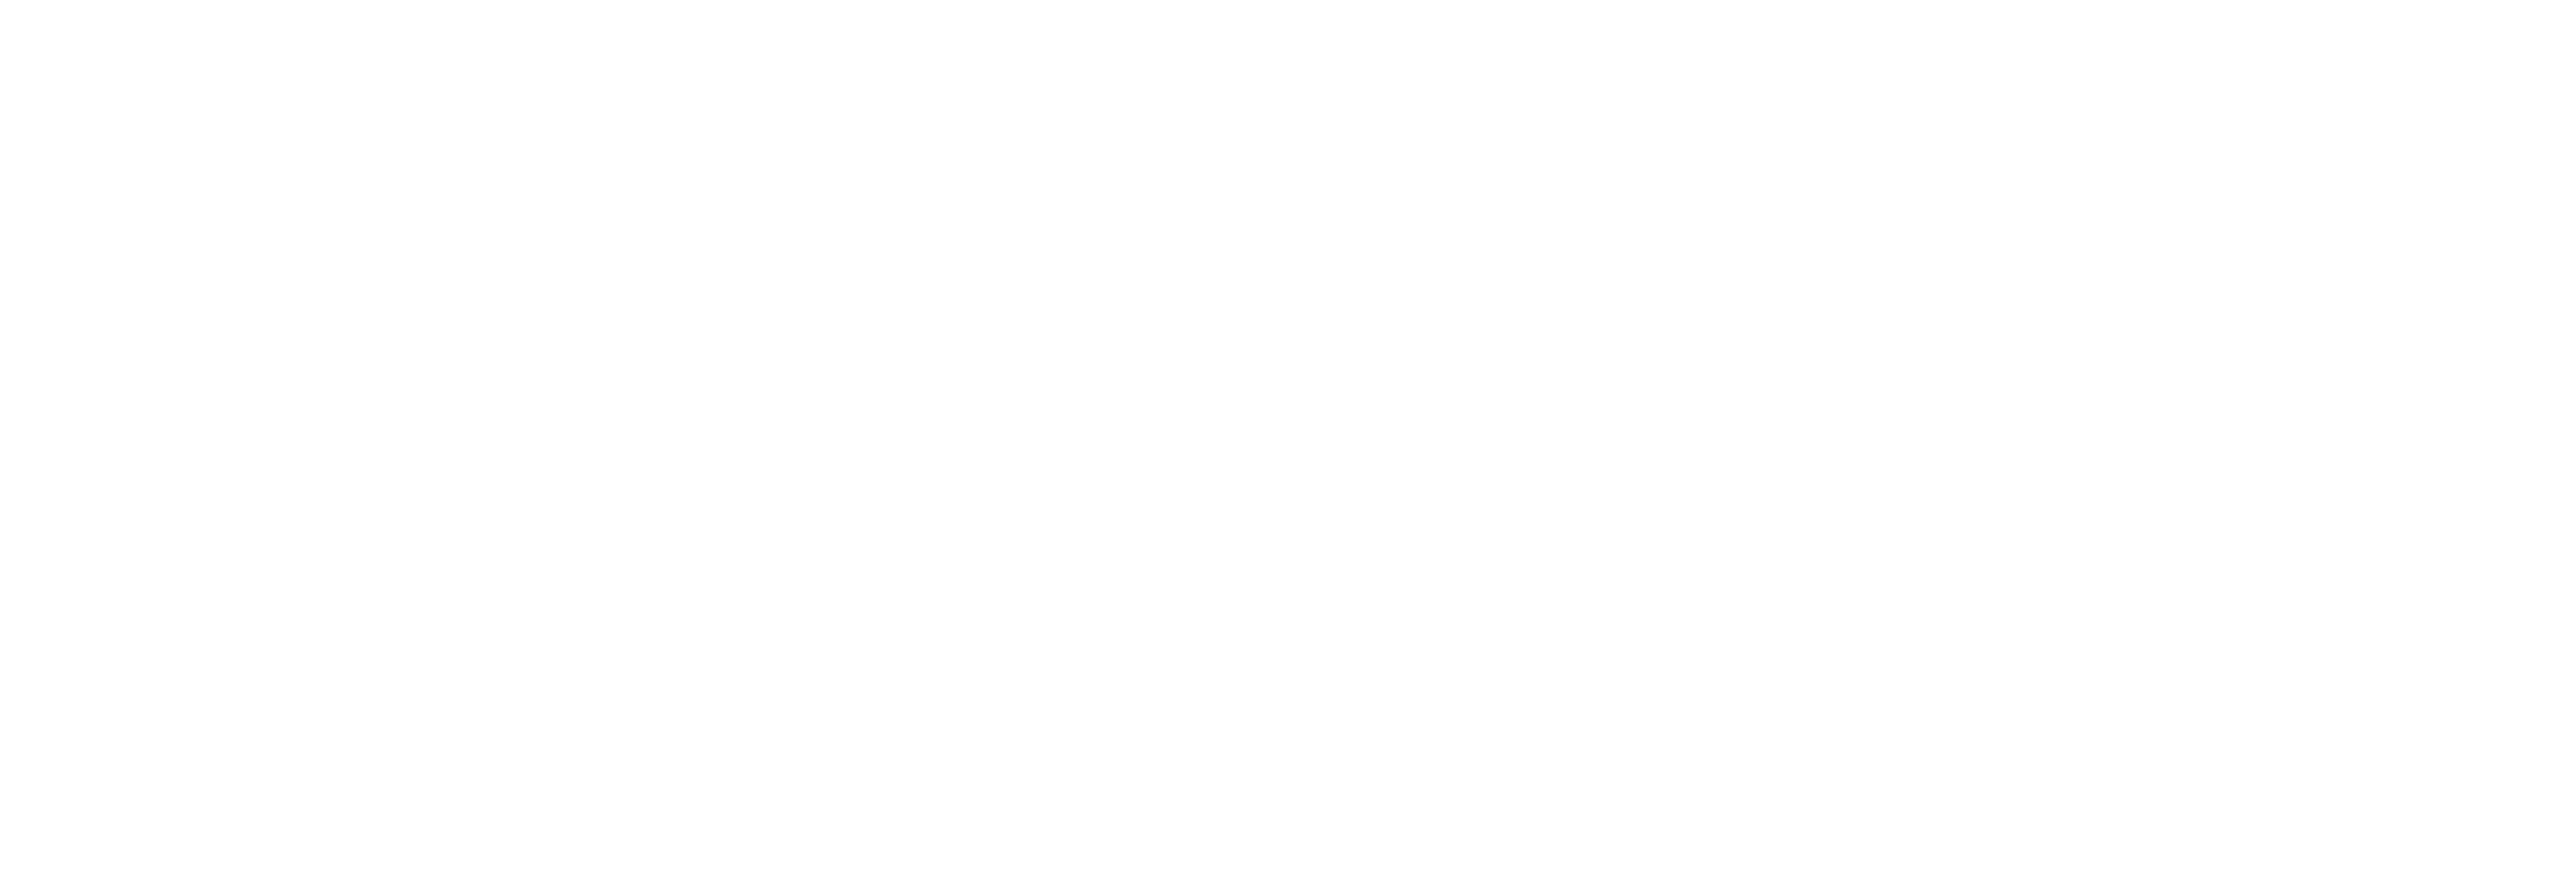 Petersfield Physiotherapy & Sports Injury Clinic